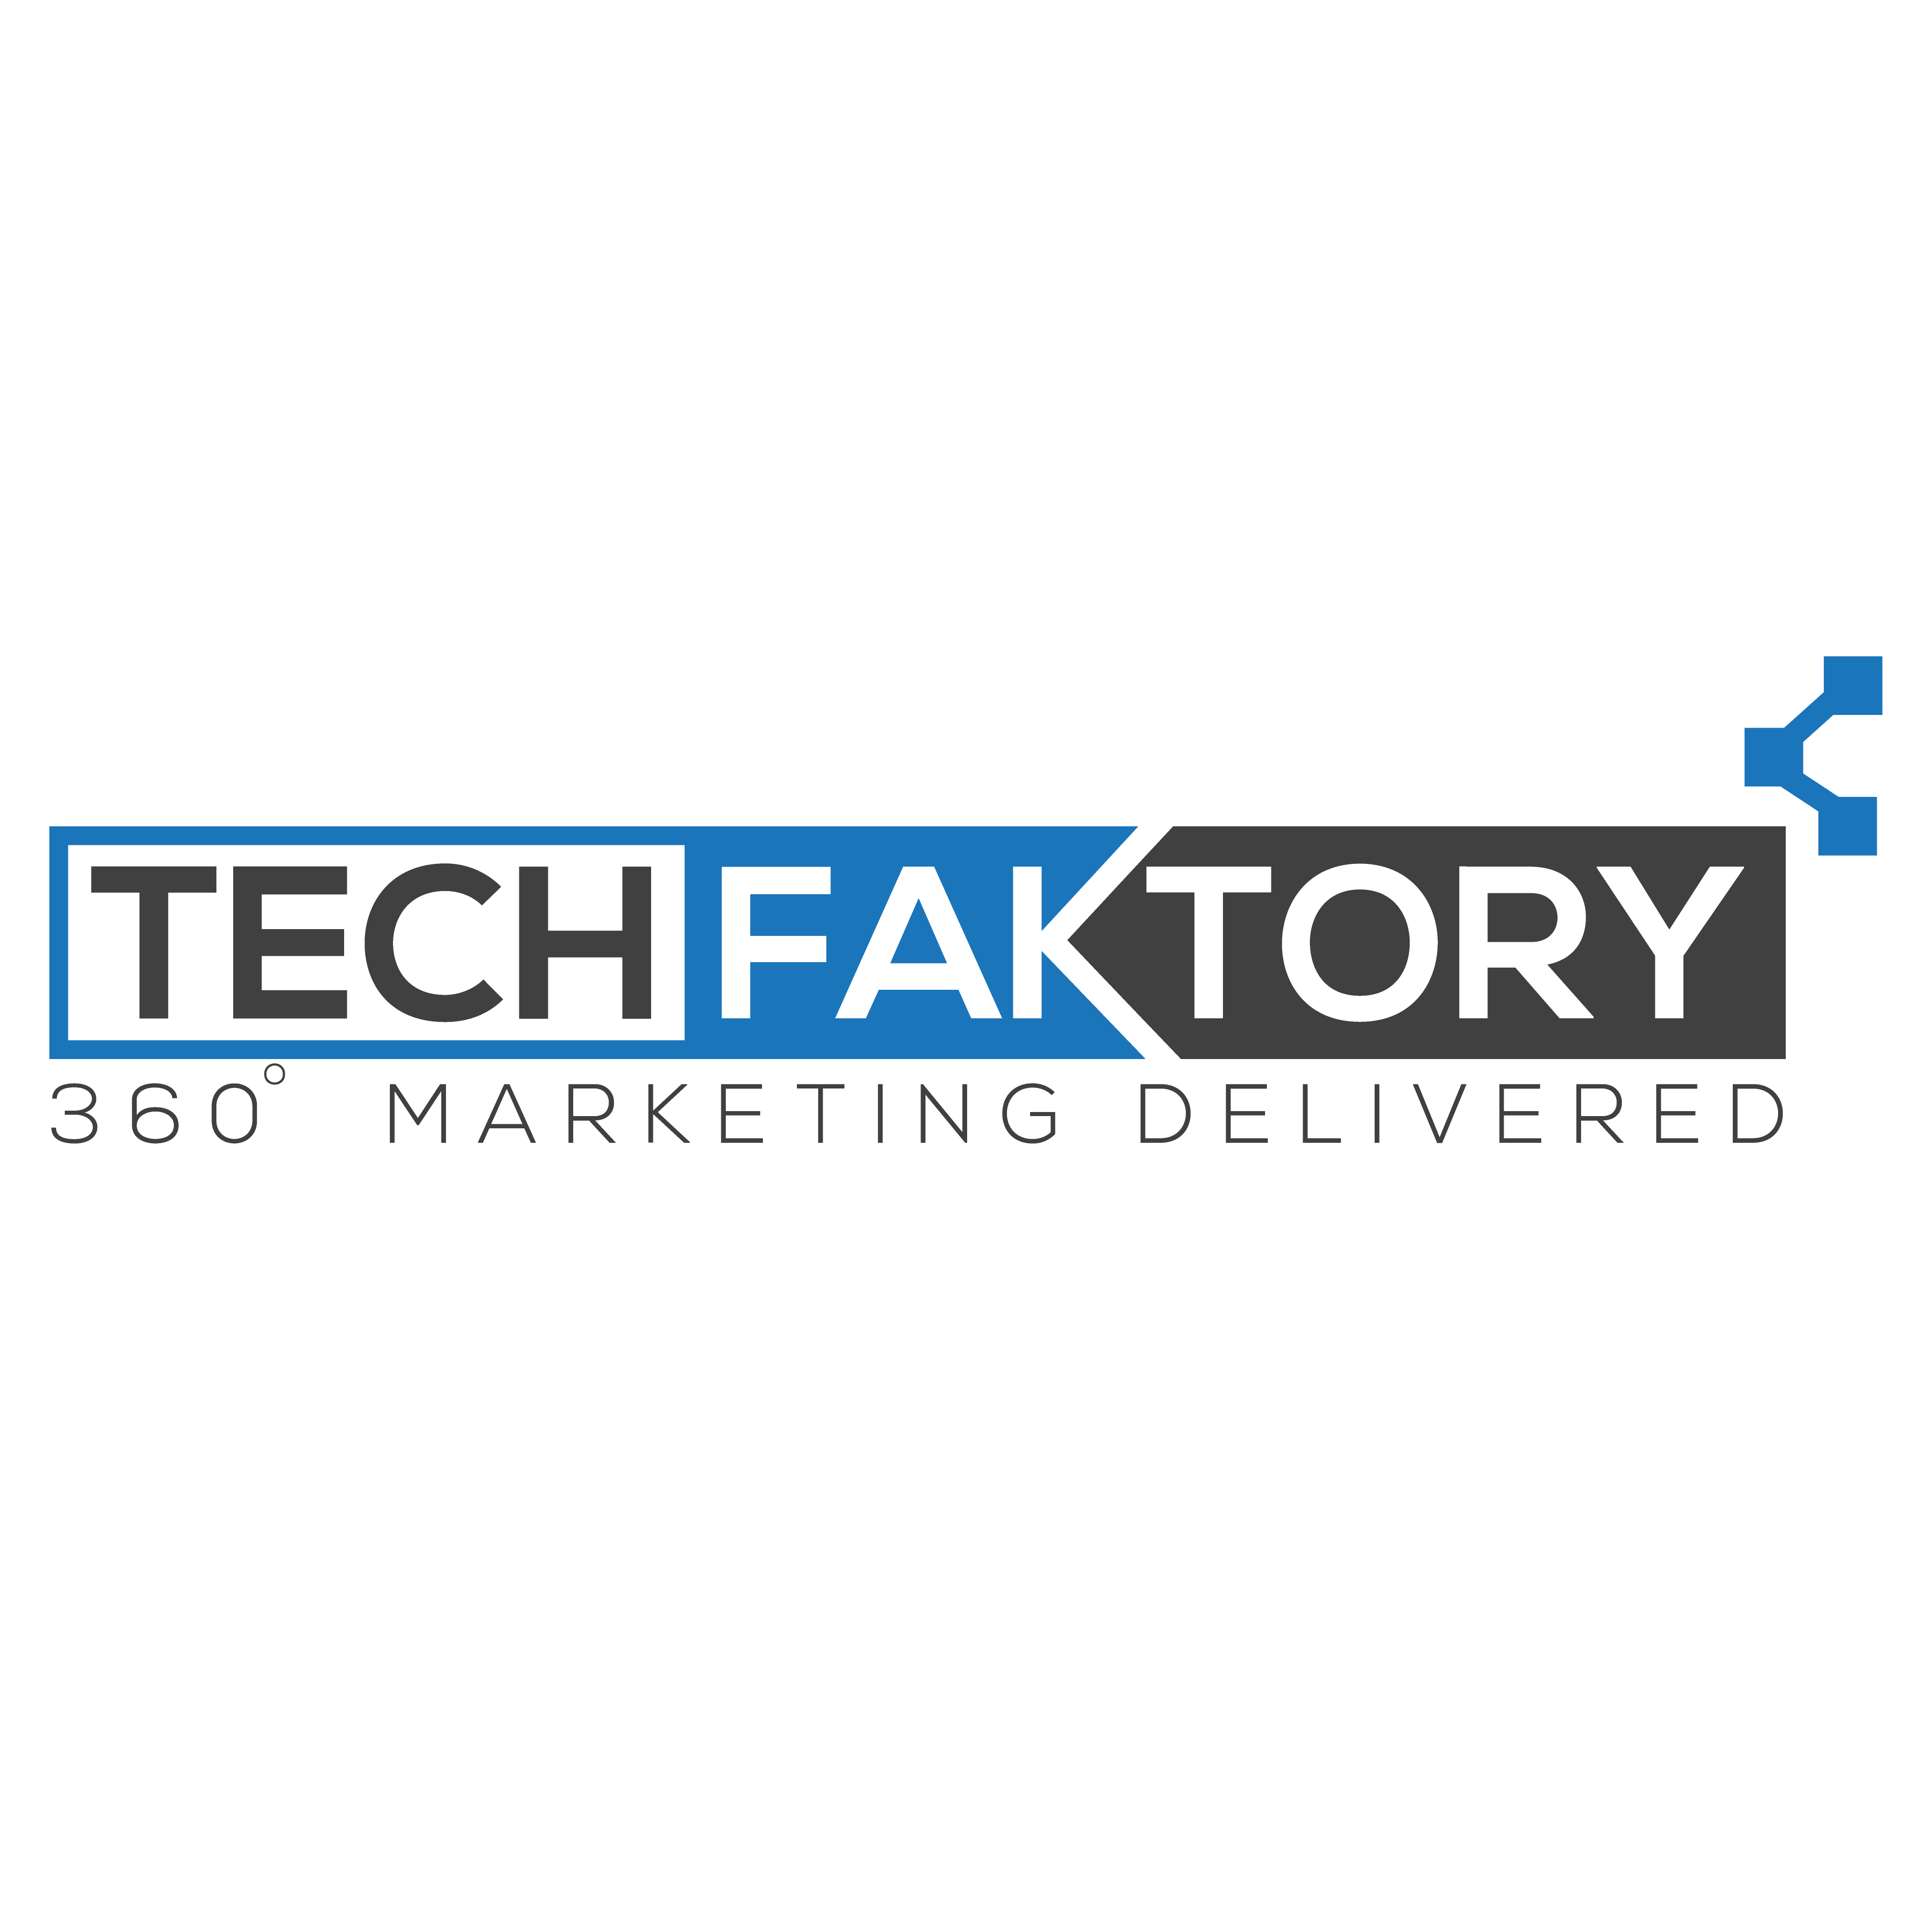 Tech Faktory Welcomes Bharat Wire Mesh